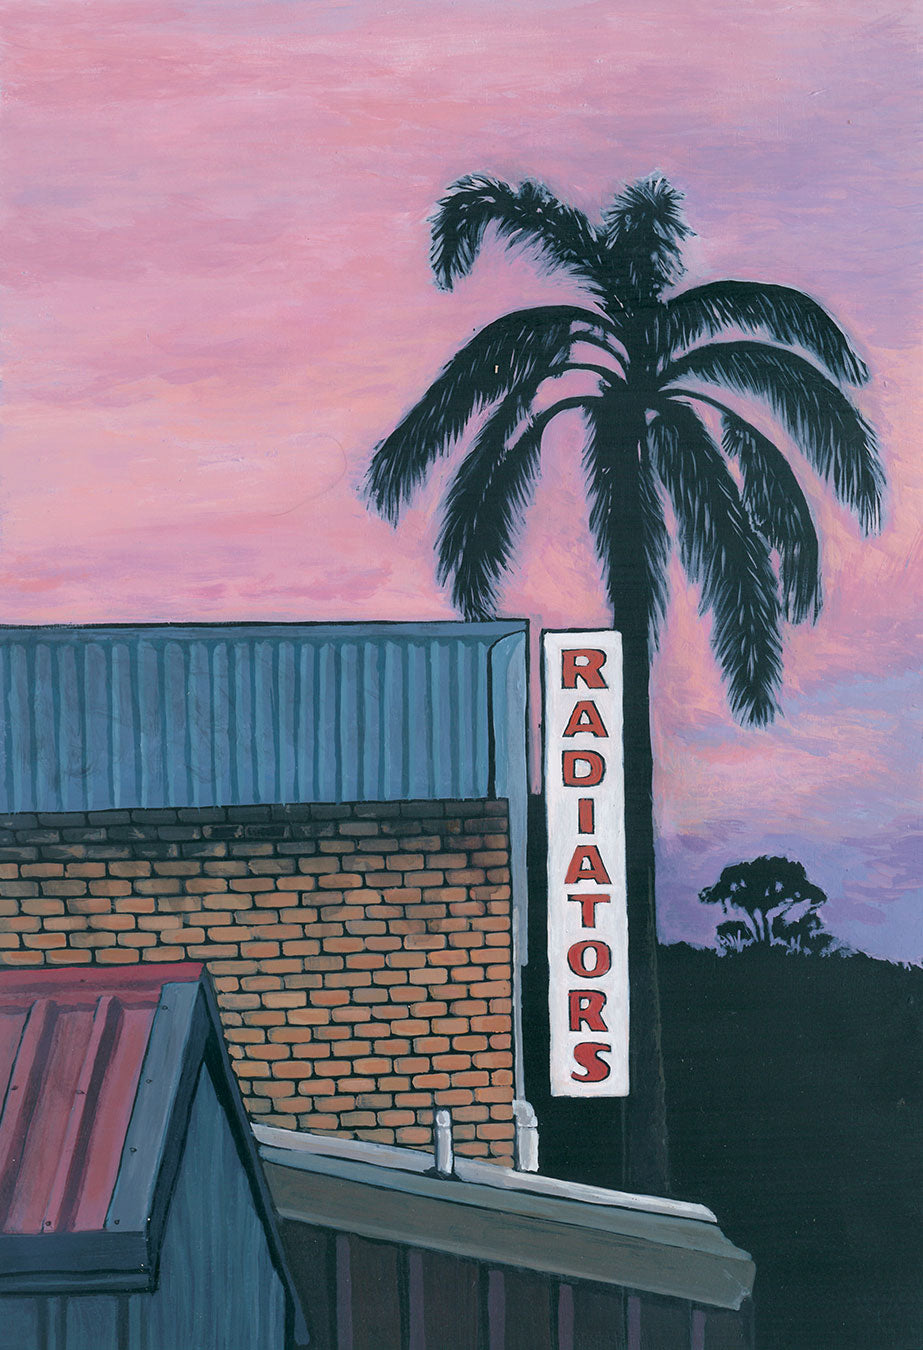 Josh Galletly Art. Painitng of a palm tree and tin roofs at dusk in Lismore, NSW. Acrylic on Plywood 285 x 417mm